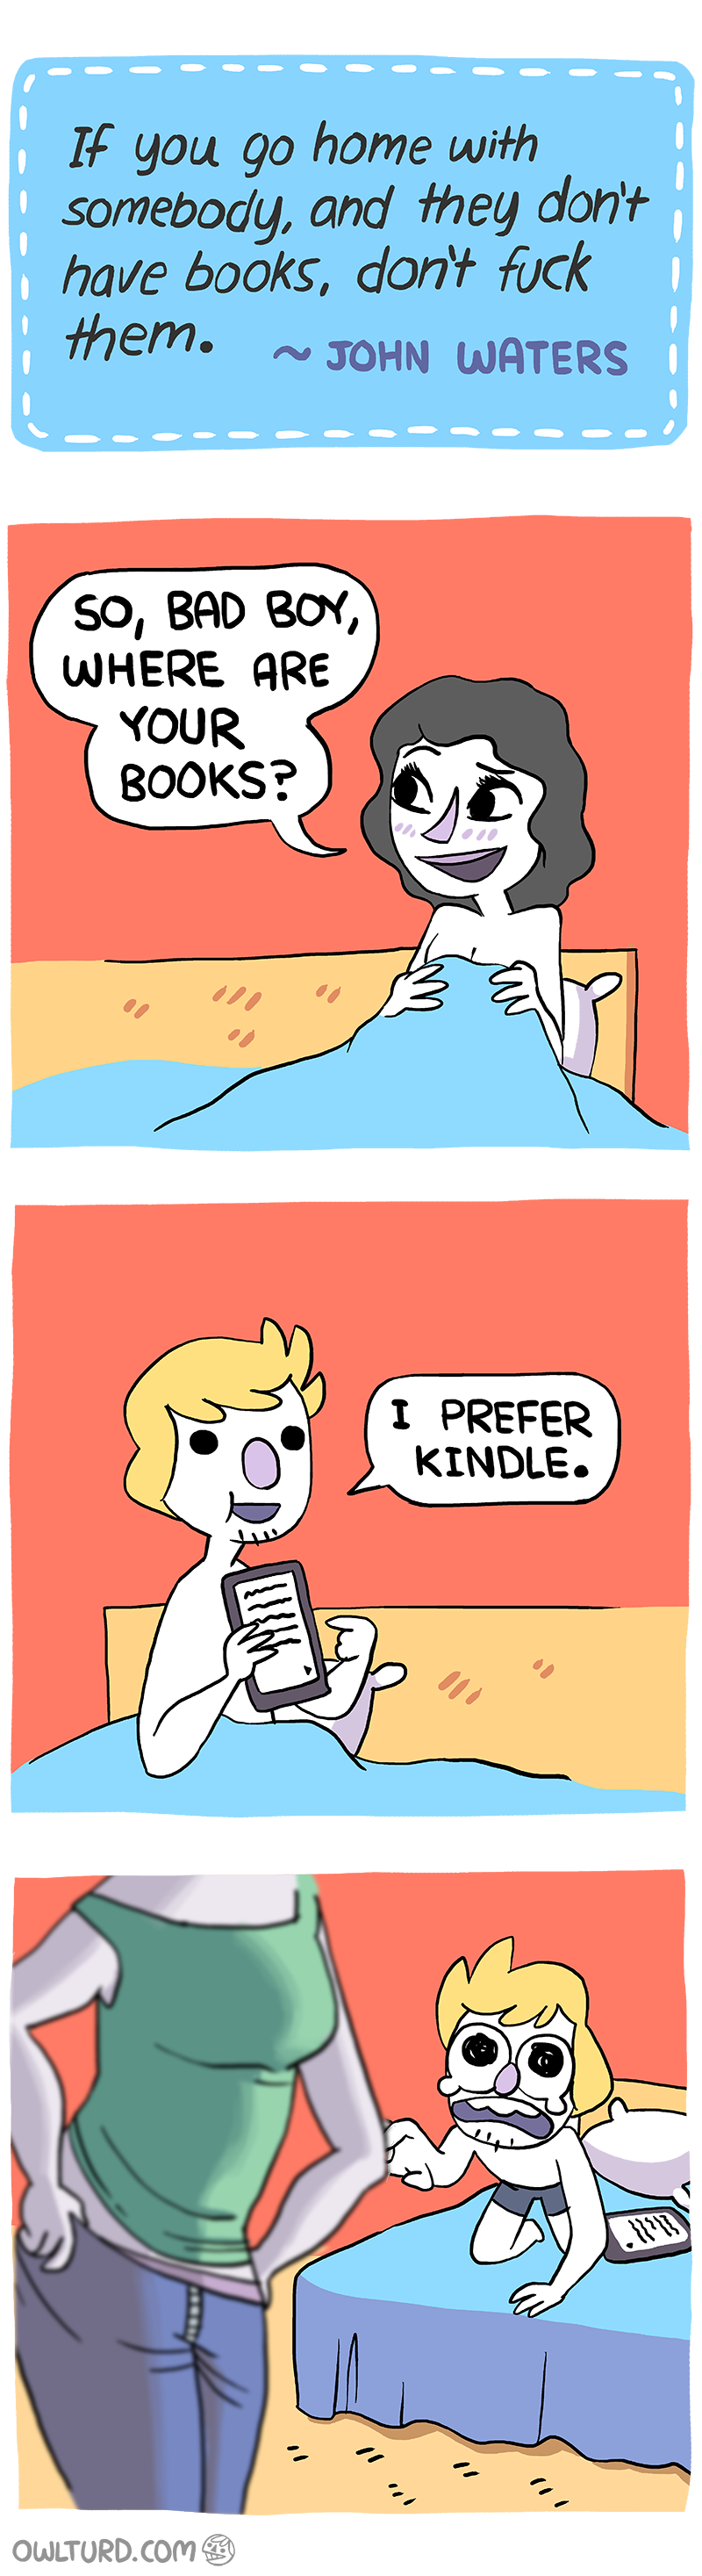 owlturd comics rule 34 - If you go home with somebody, and they don't have books, don't fuck them. John Waters So, Bad Boy, Where Are Your Books? Bay 1 Prefer Kindle.